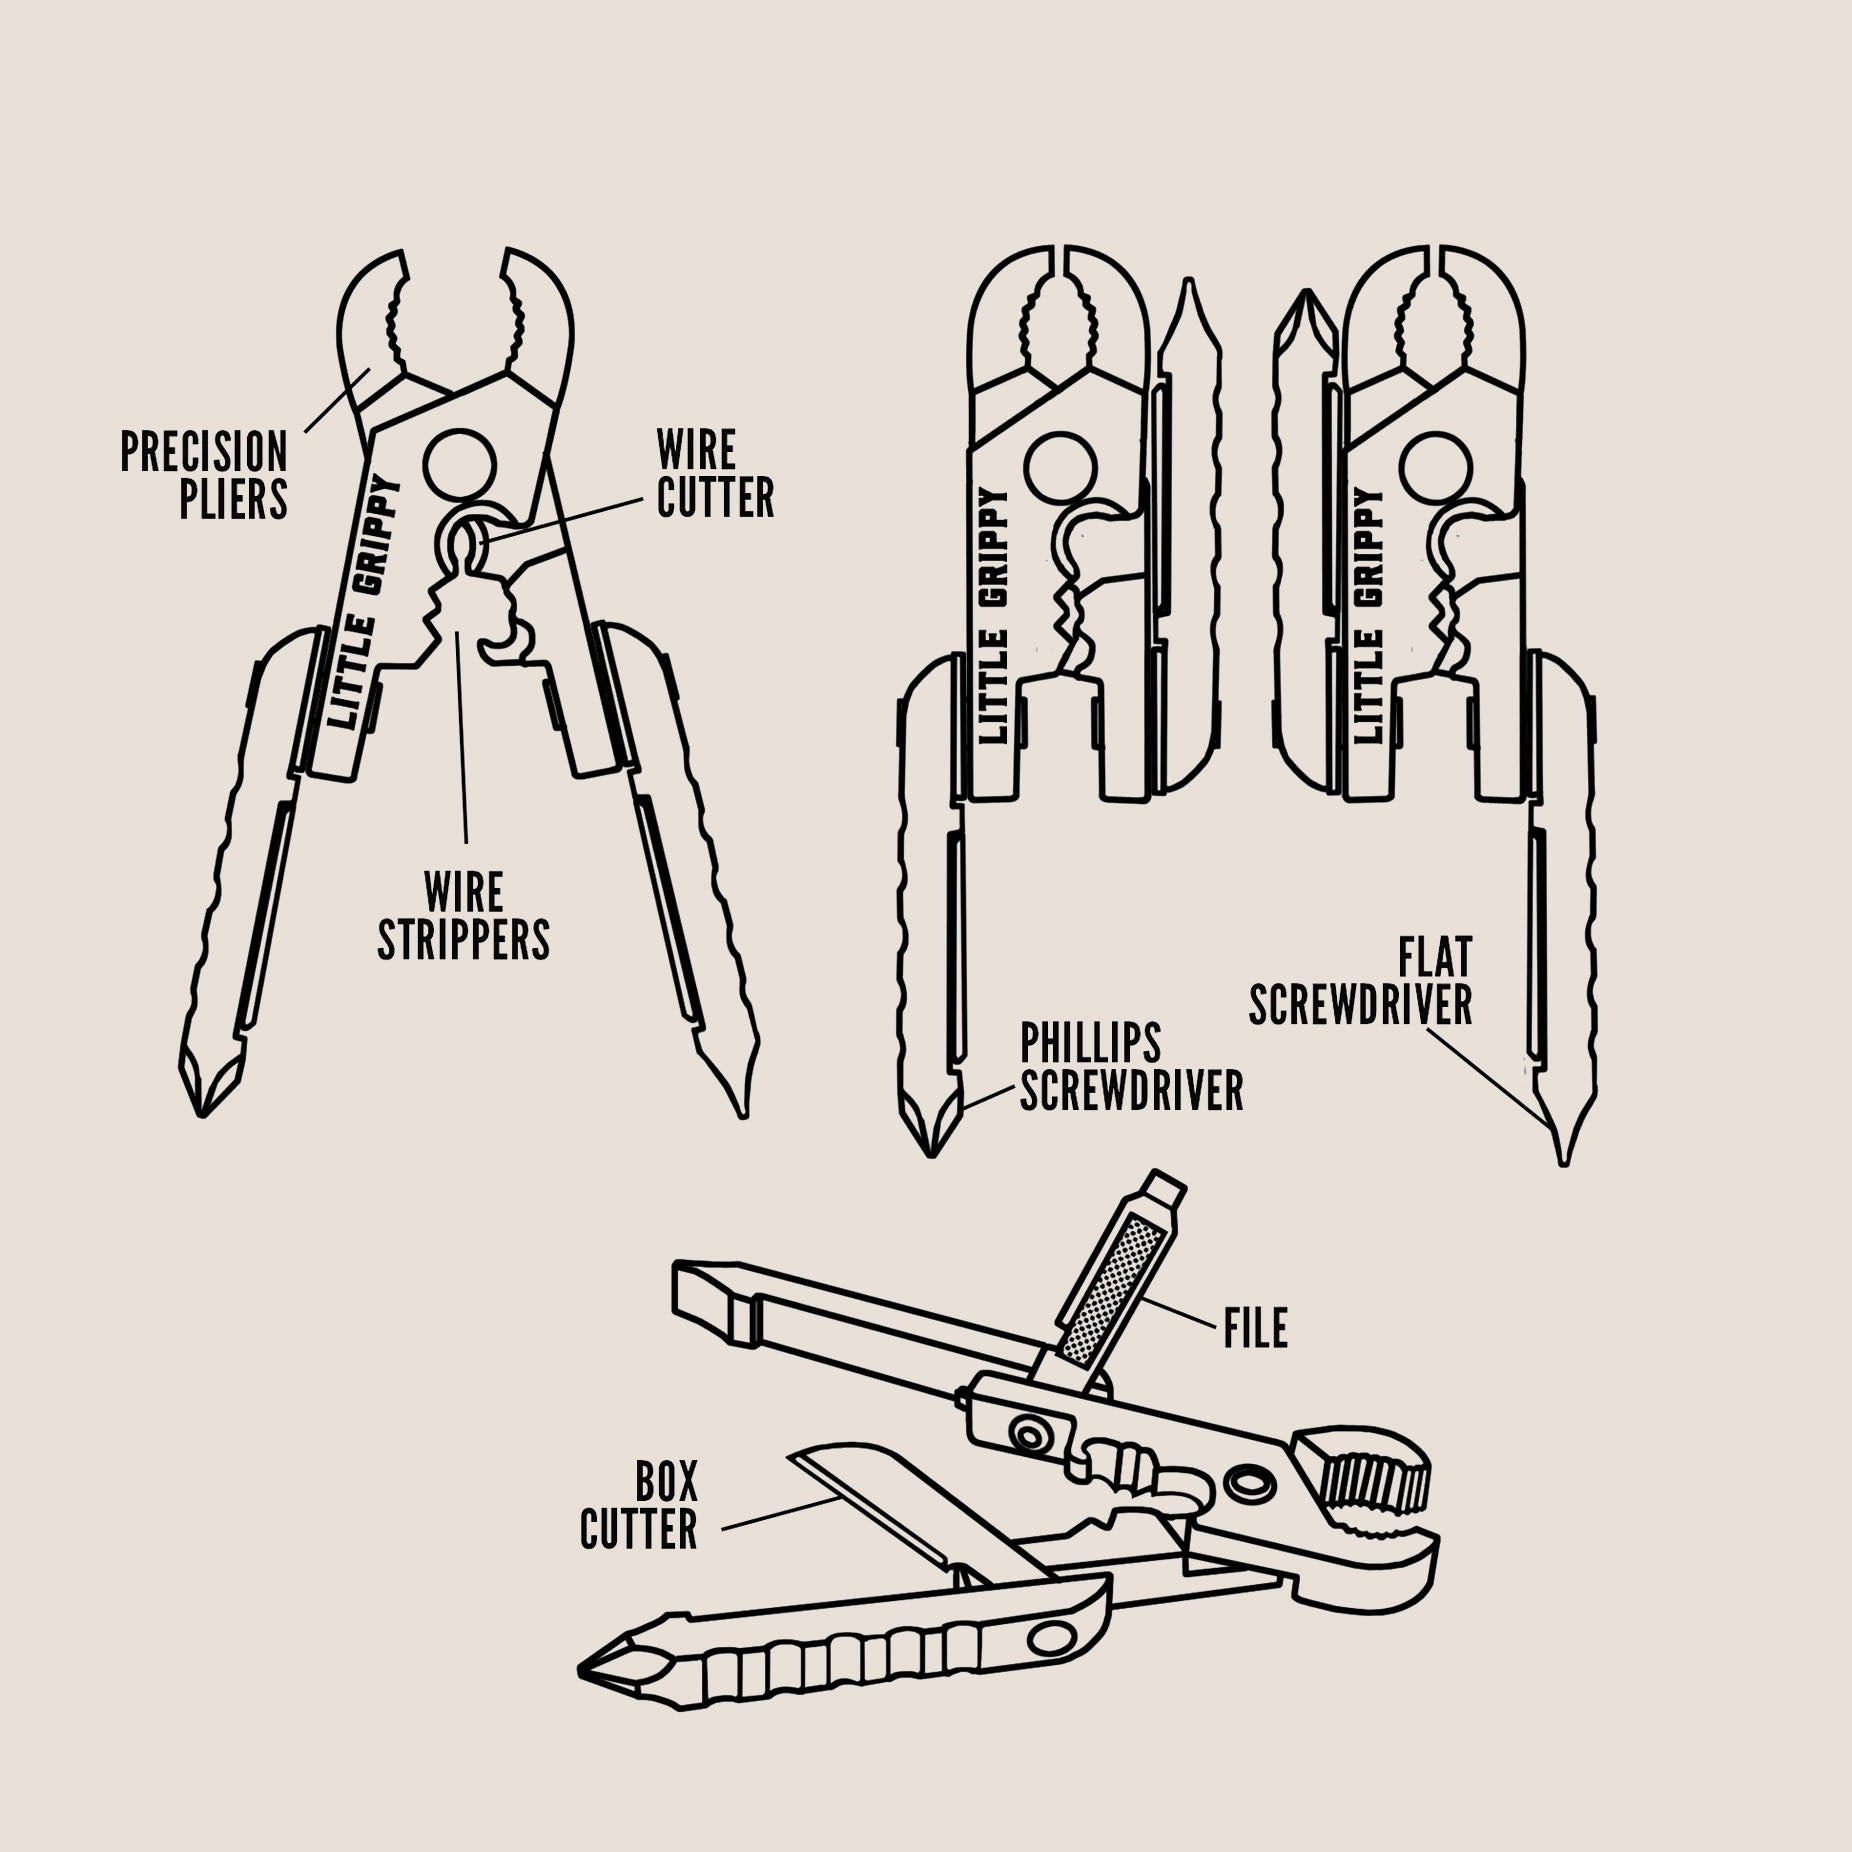 diagram Little Grippy Pliers Multifunction tool, pocket sized for DIY projects, camping, glamping and hiking! 